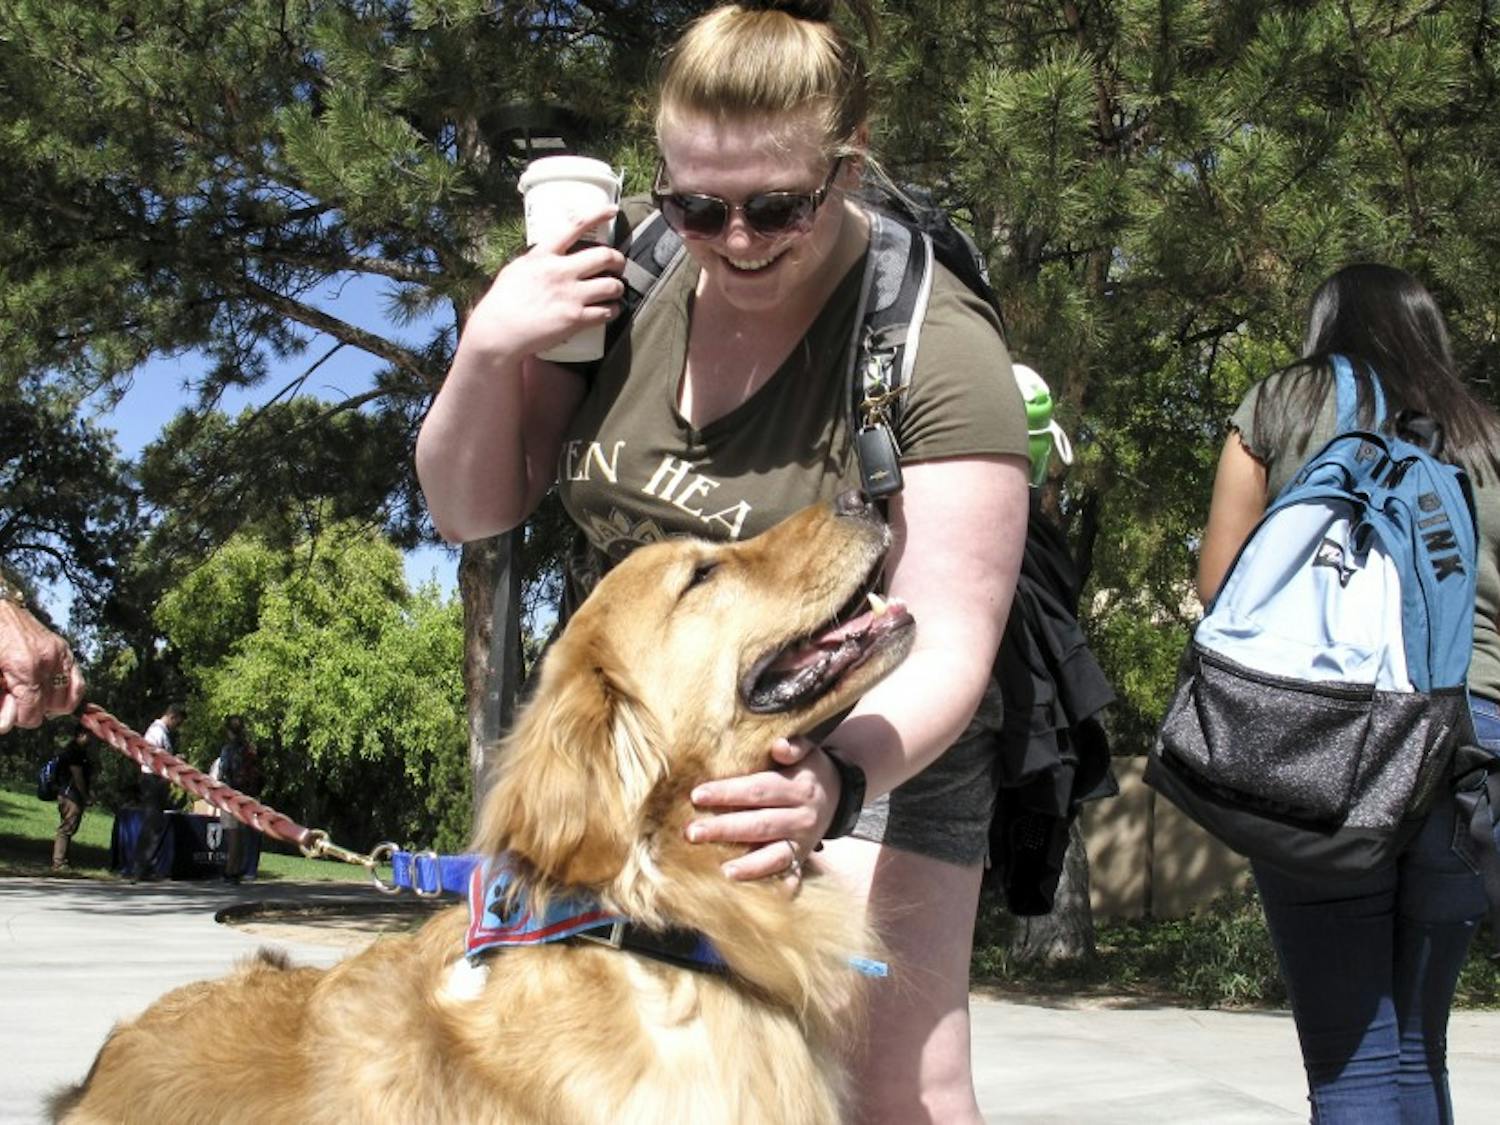 A UNM stops to pet a dog on her way to class.